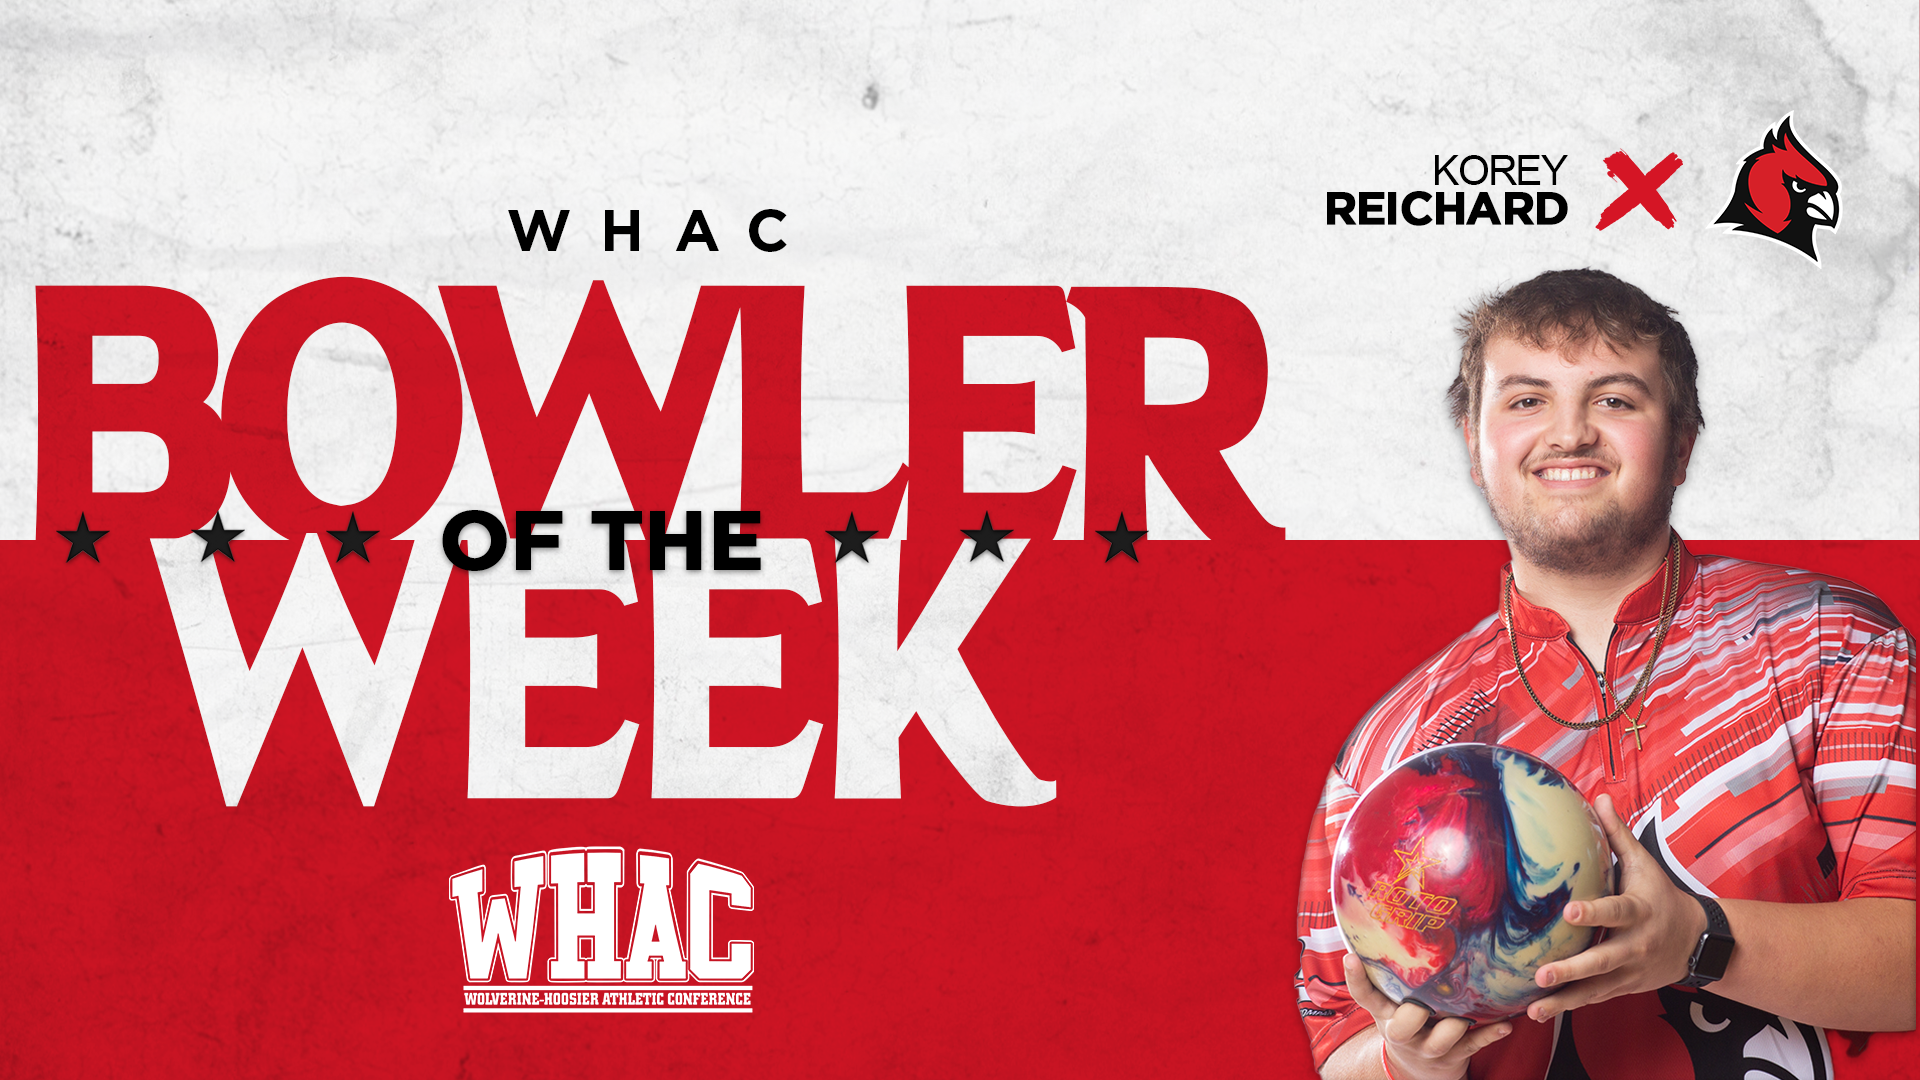 Reichard earns second WHAC Bowler of the Week honors